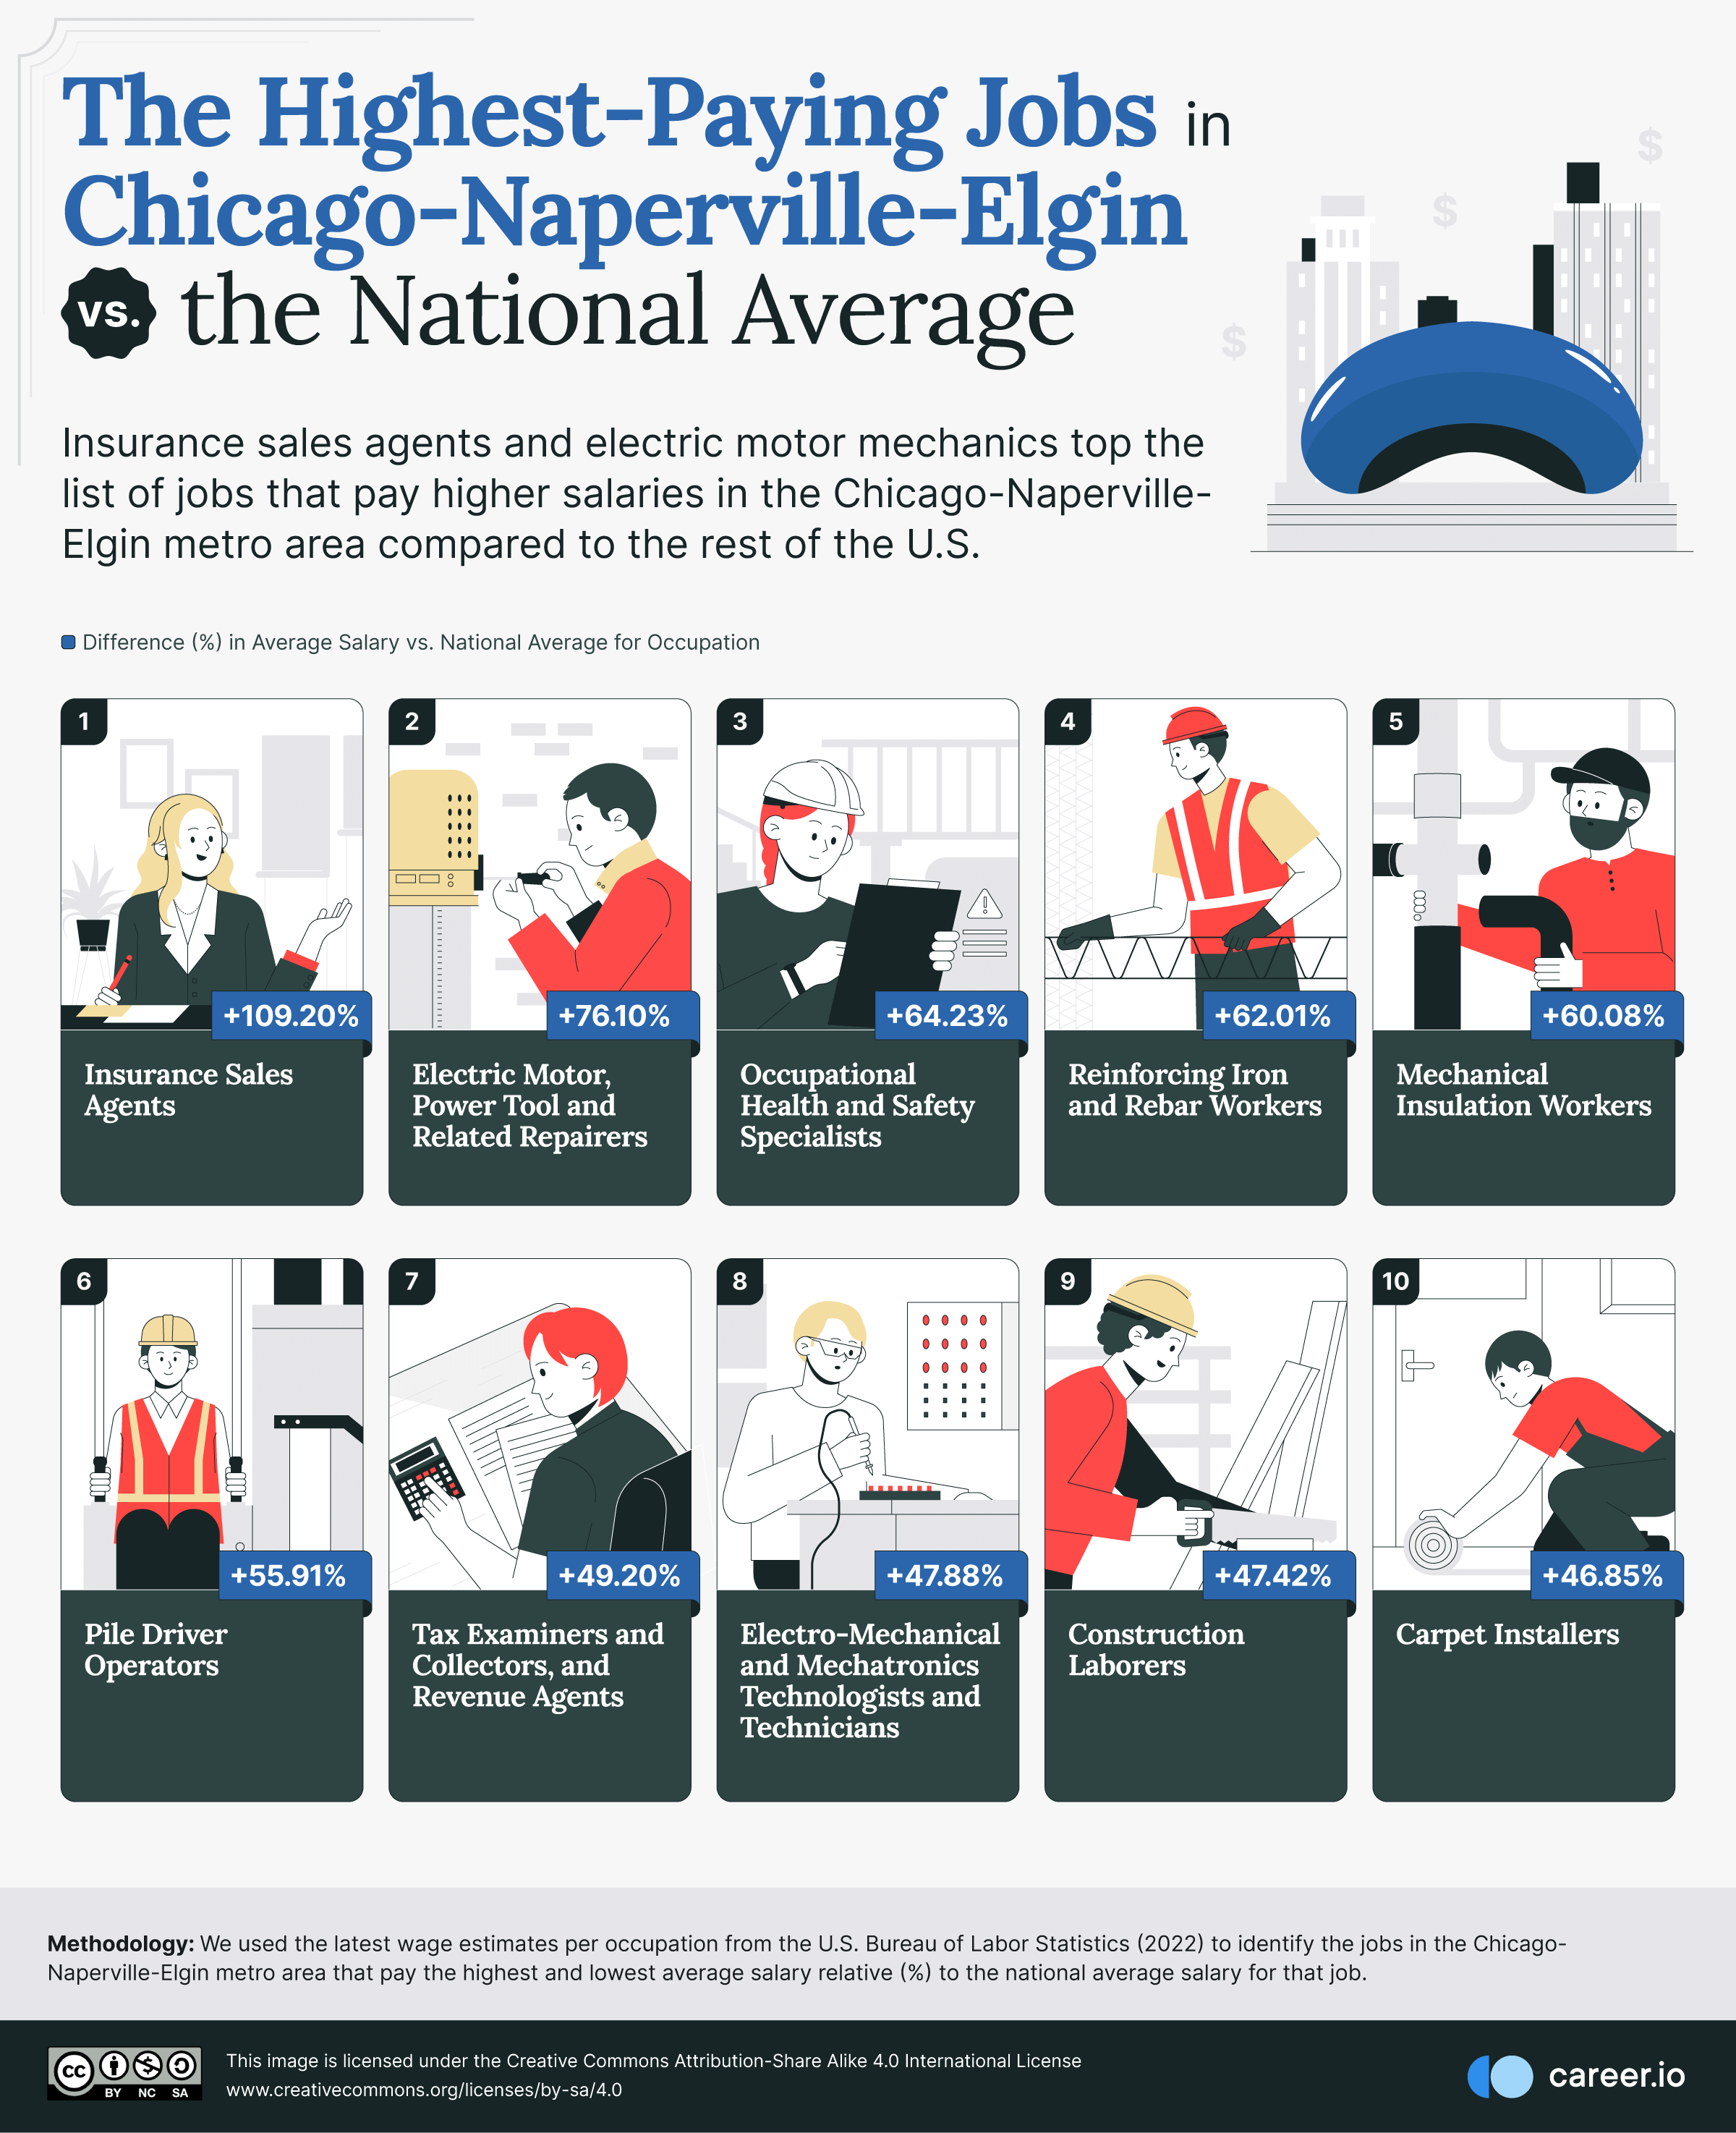 06_Highest-Paying-Job-in-CH-NAP-ELG-vs-the-National-Average